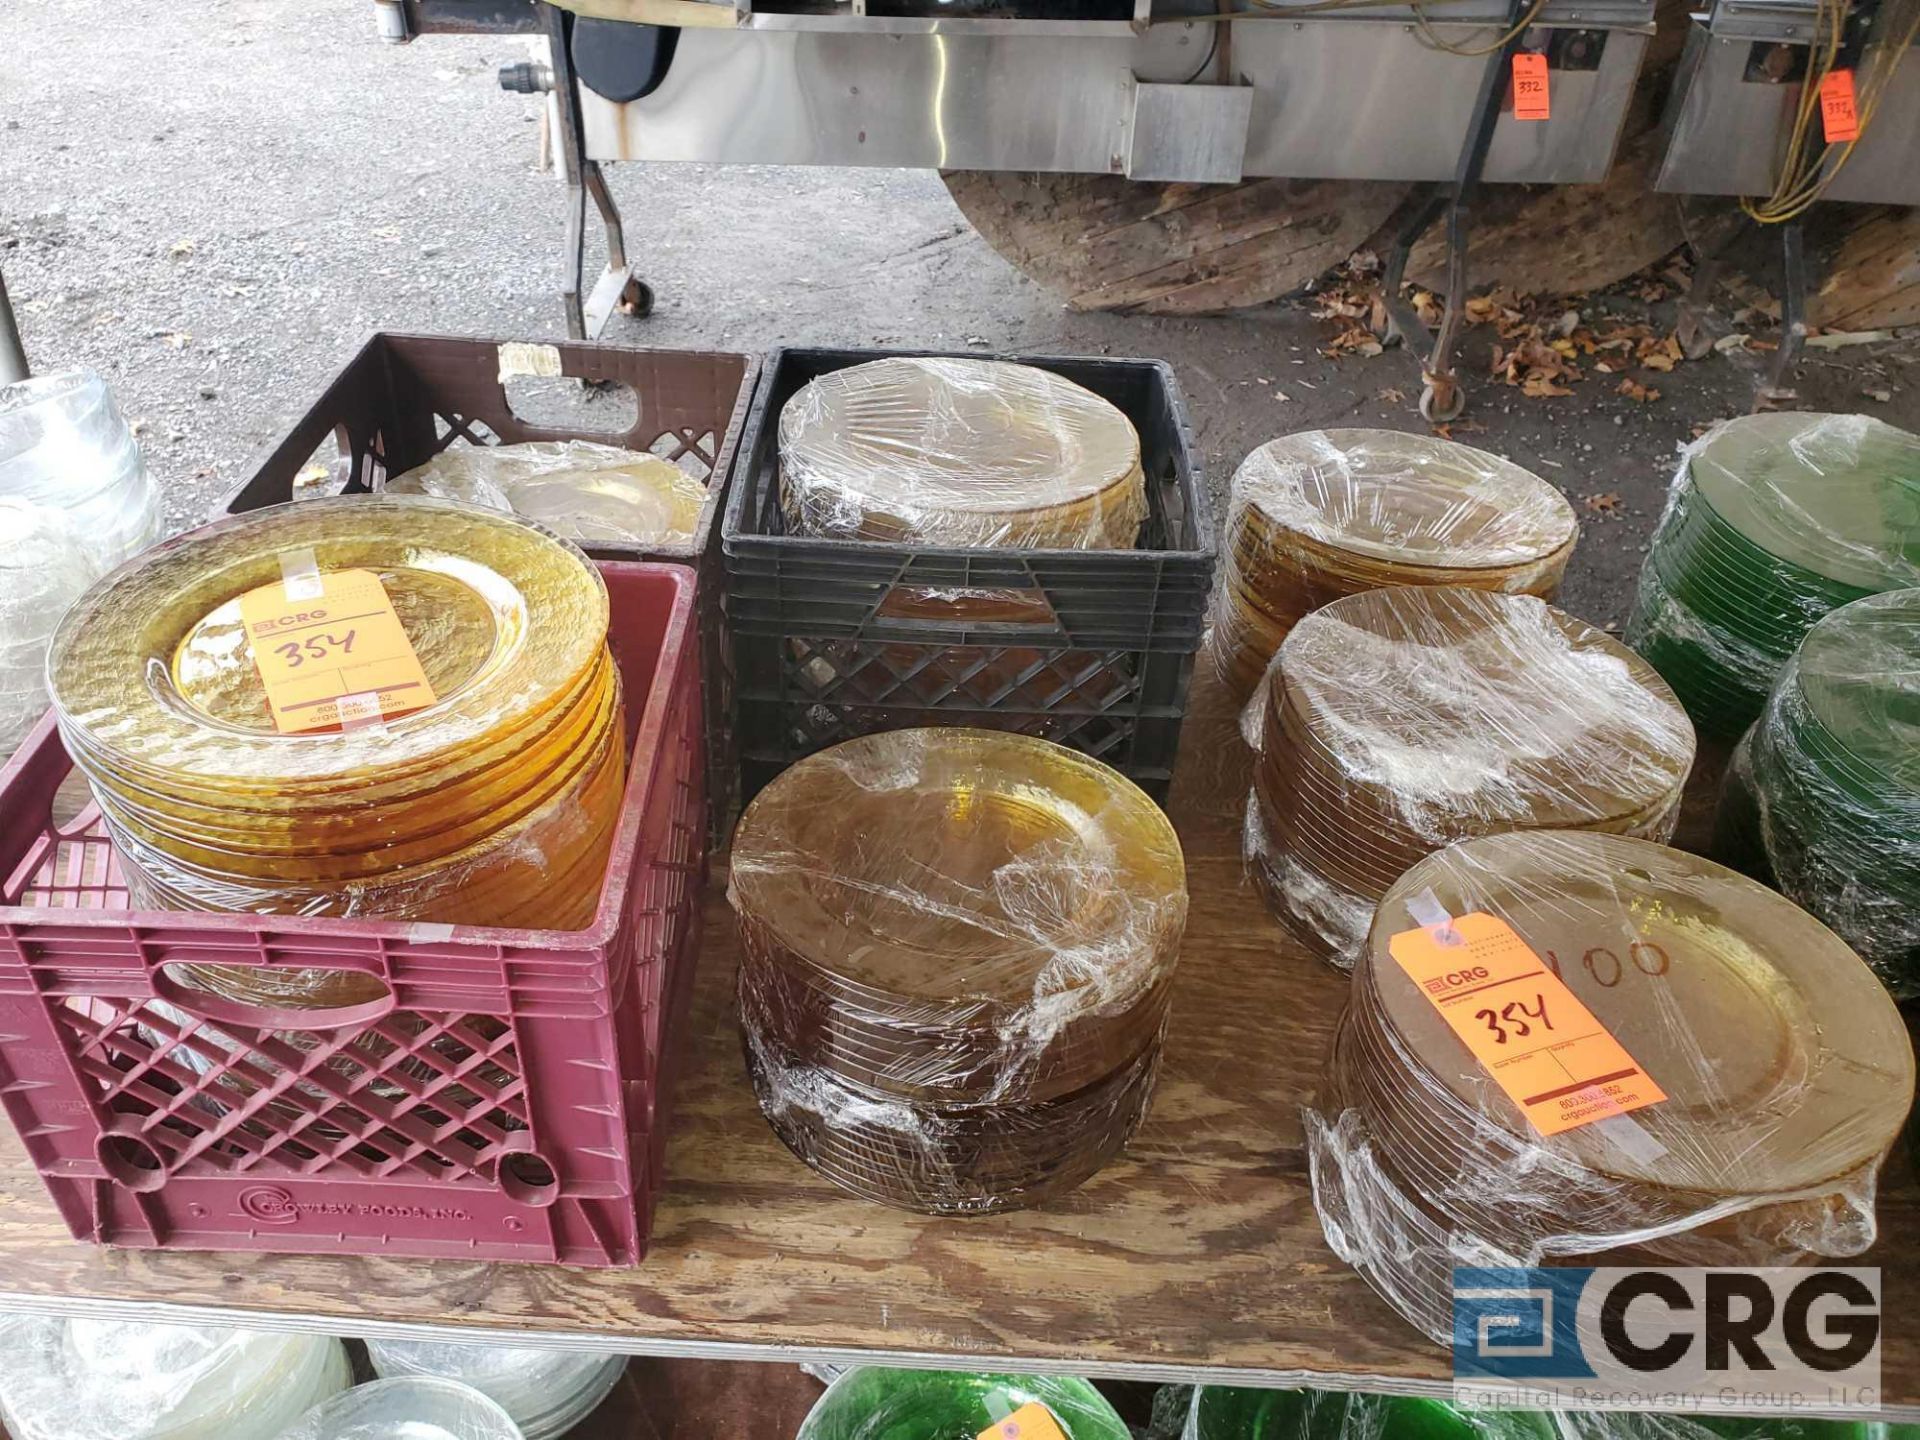 Lot of Yellow glass plates including (140) 10 1/2 inch plates and (90) 8 inch plates - Image 2 of 3